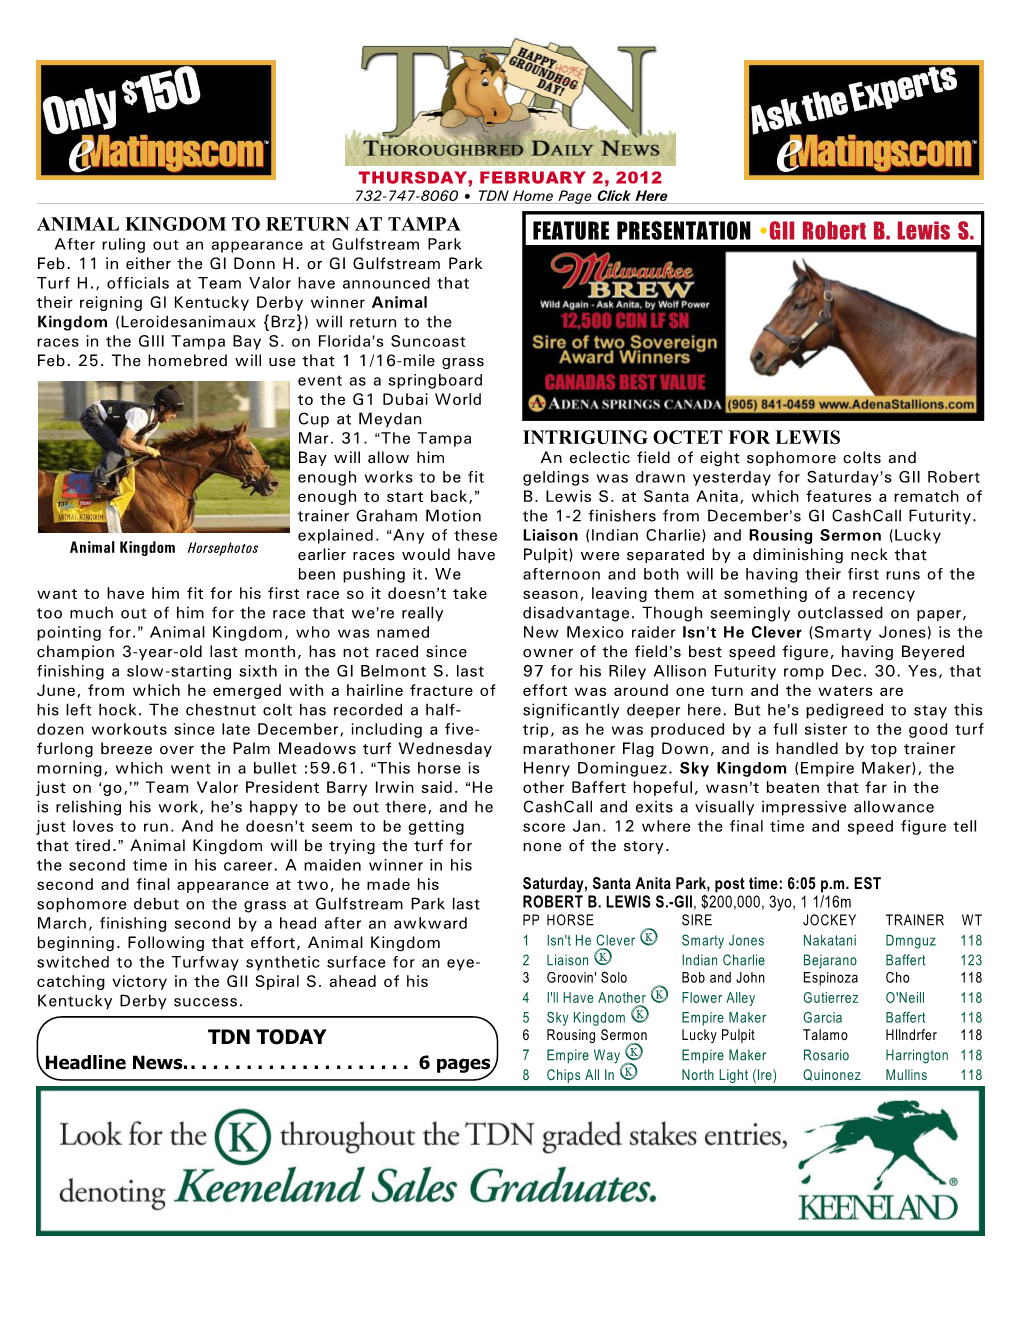 2, 2012 732-747-8060 $ TDN Home Page Click Here ANIMAL KINGDOM to RETURN at TAMPA After Ruling out an Appearance at Gulfstream Park FEATURE PRESENTATION •GII Robert B